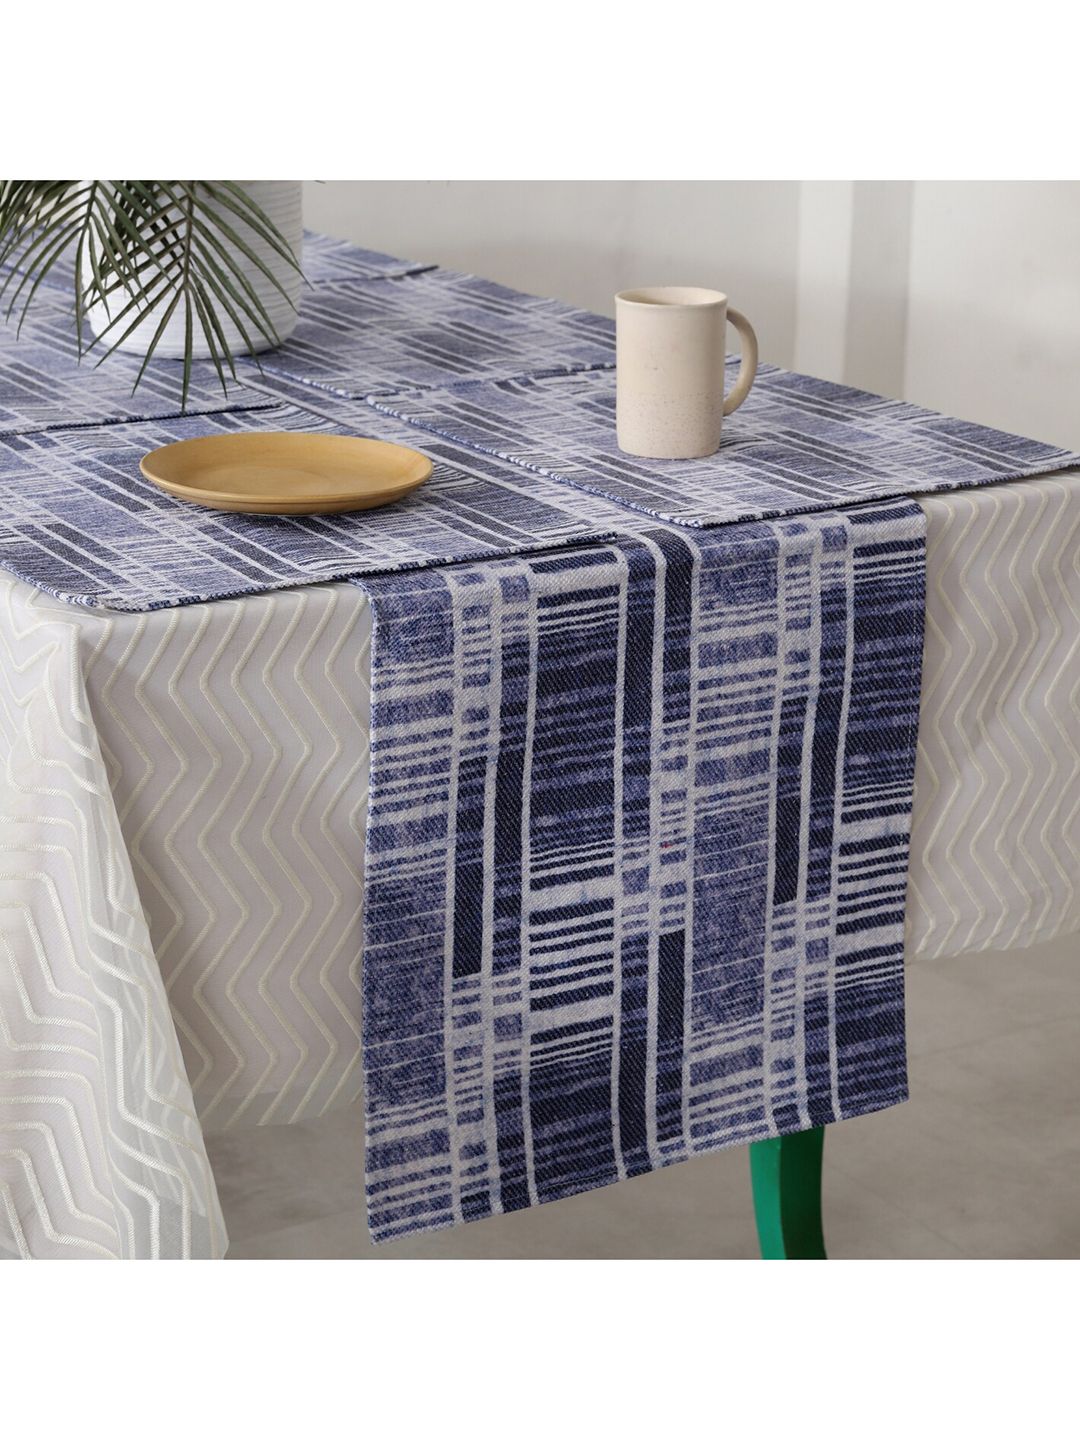 HANDICRAFT PALACE Set Of 7 Blue Striped Cotton Table Runners Price in India